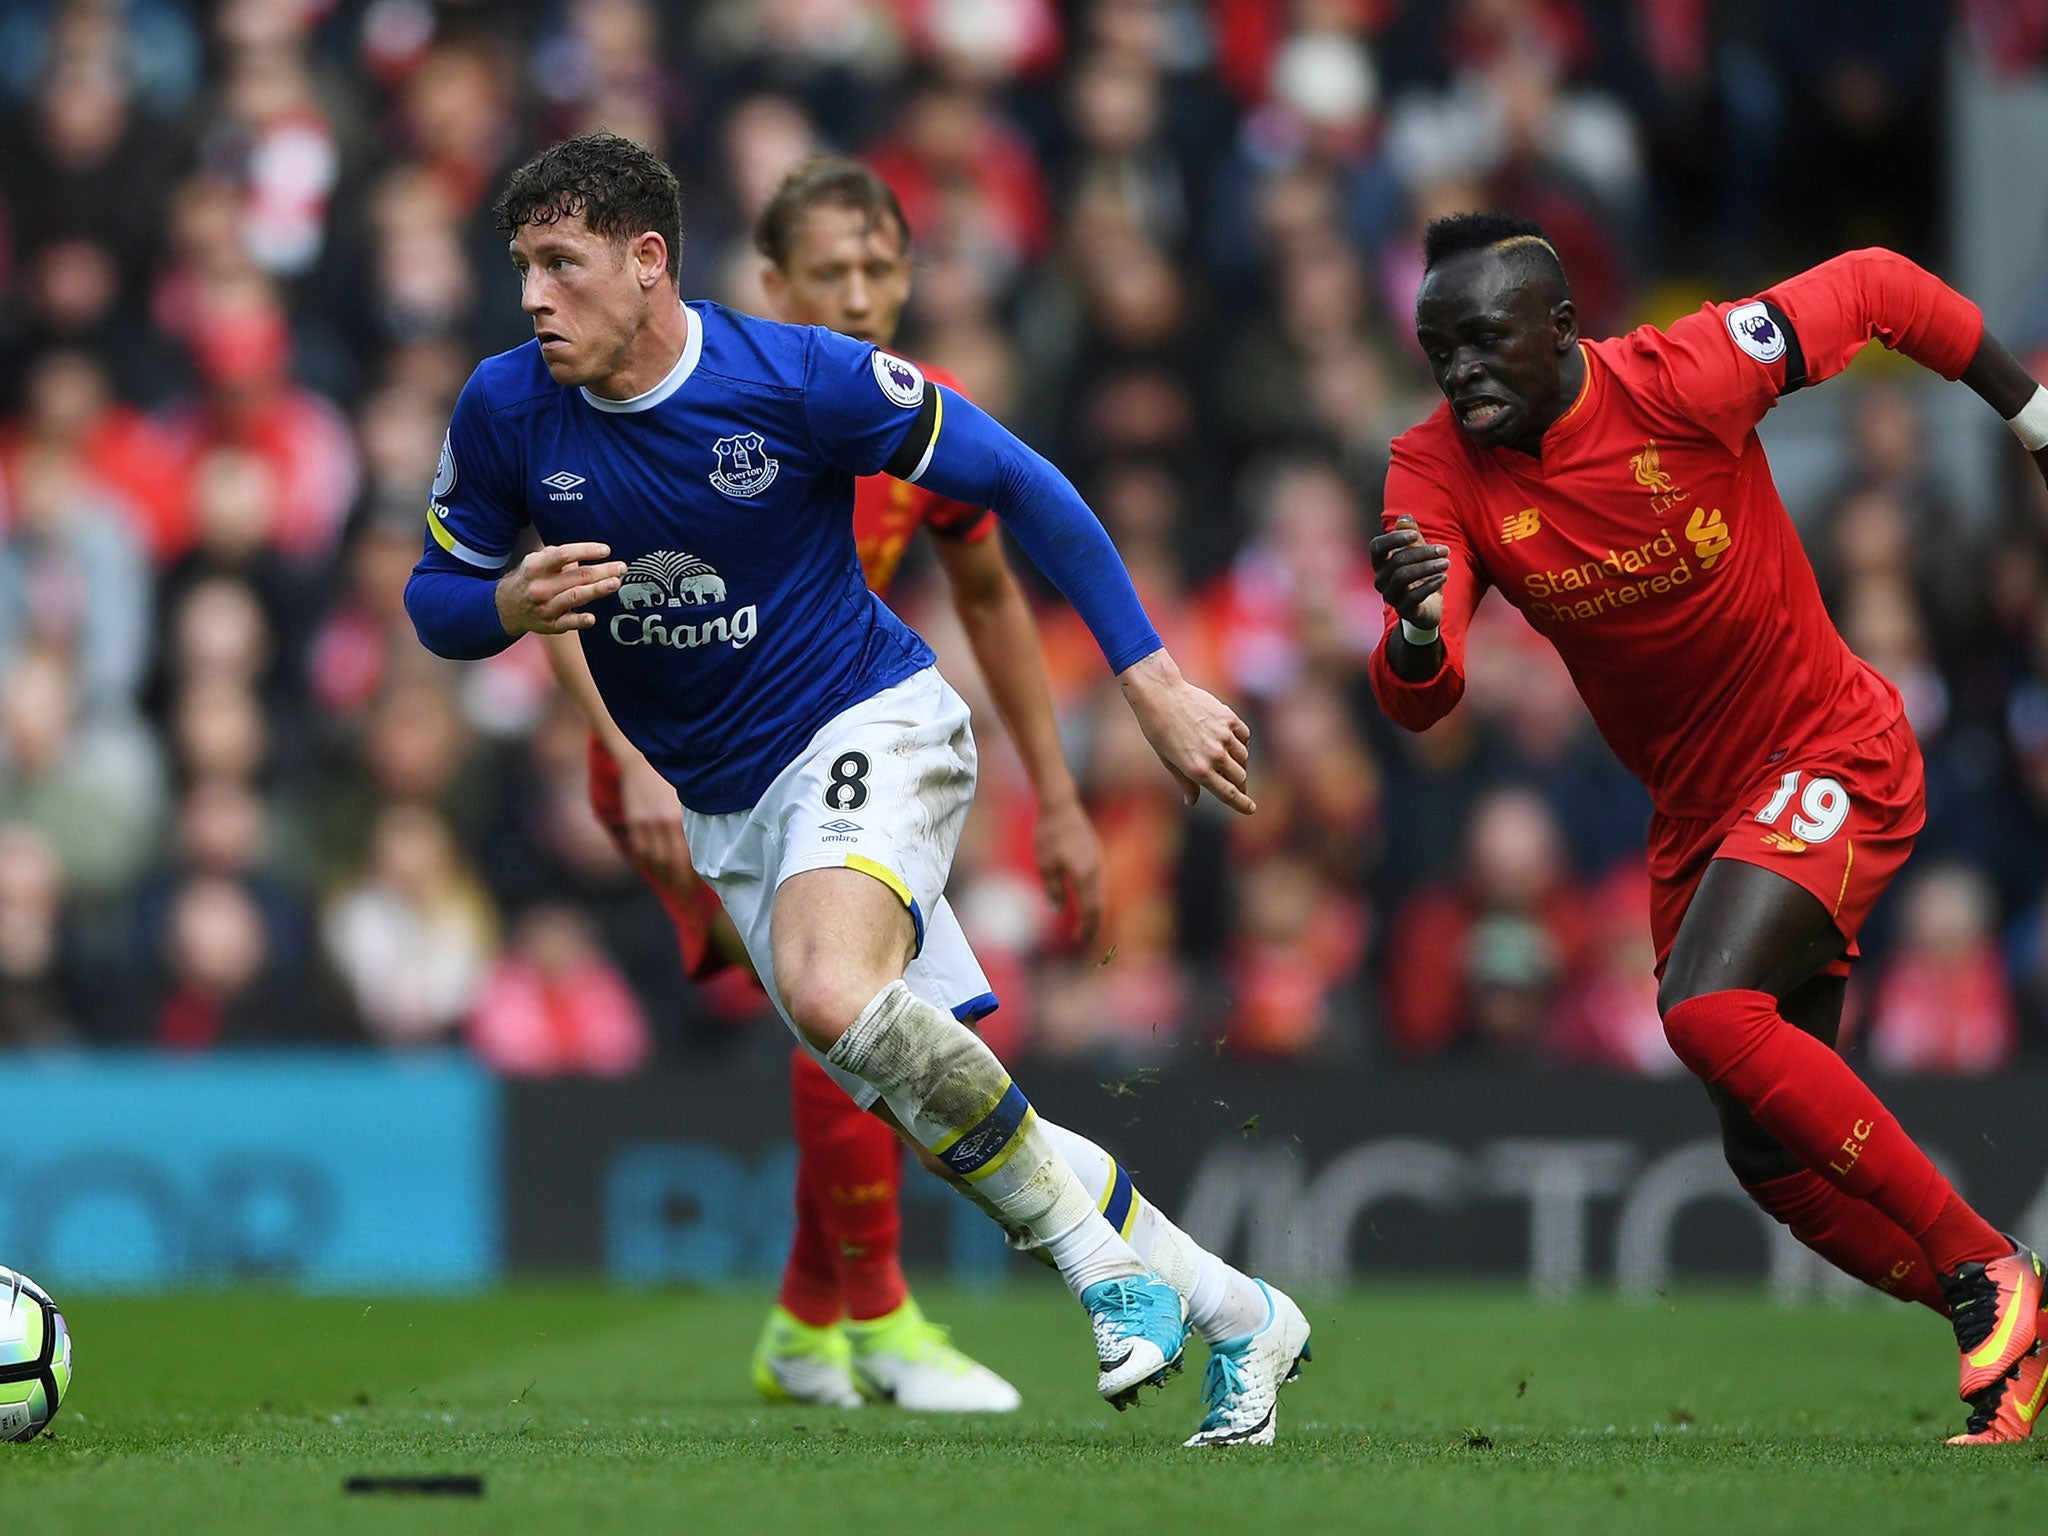 Barkley could have been sent-off as he made a number of poor tackles